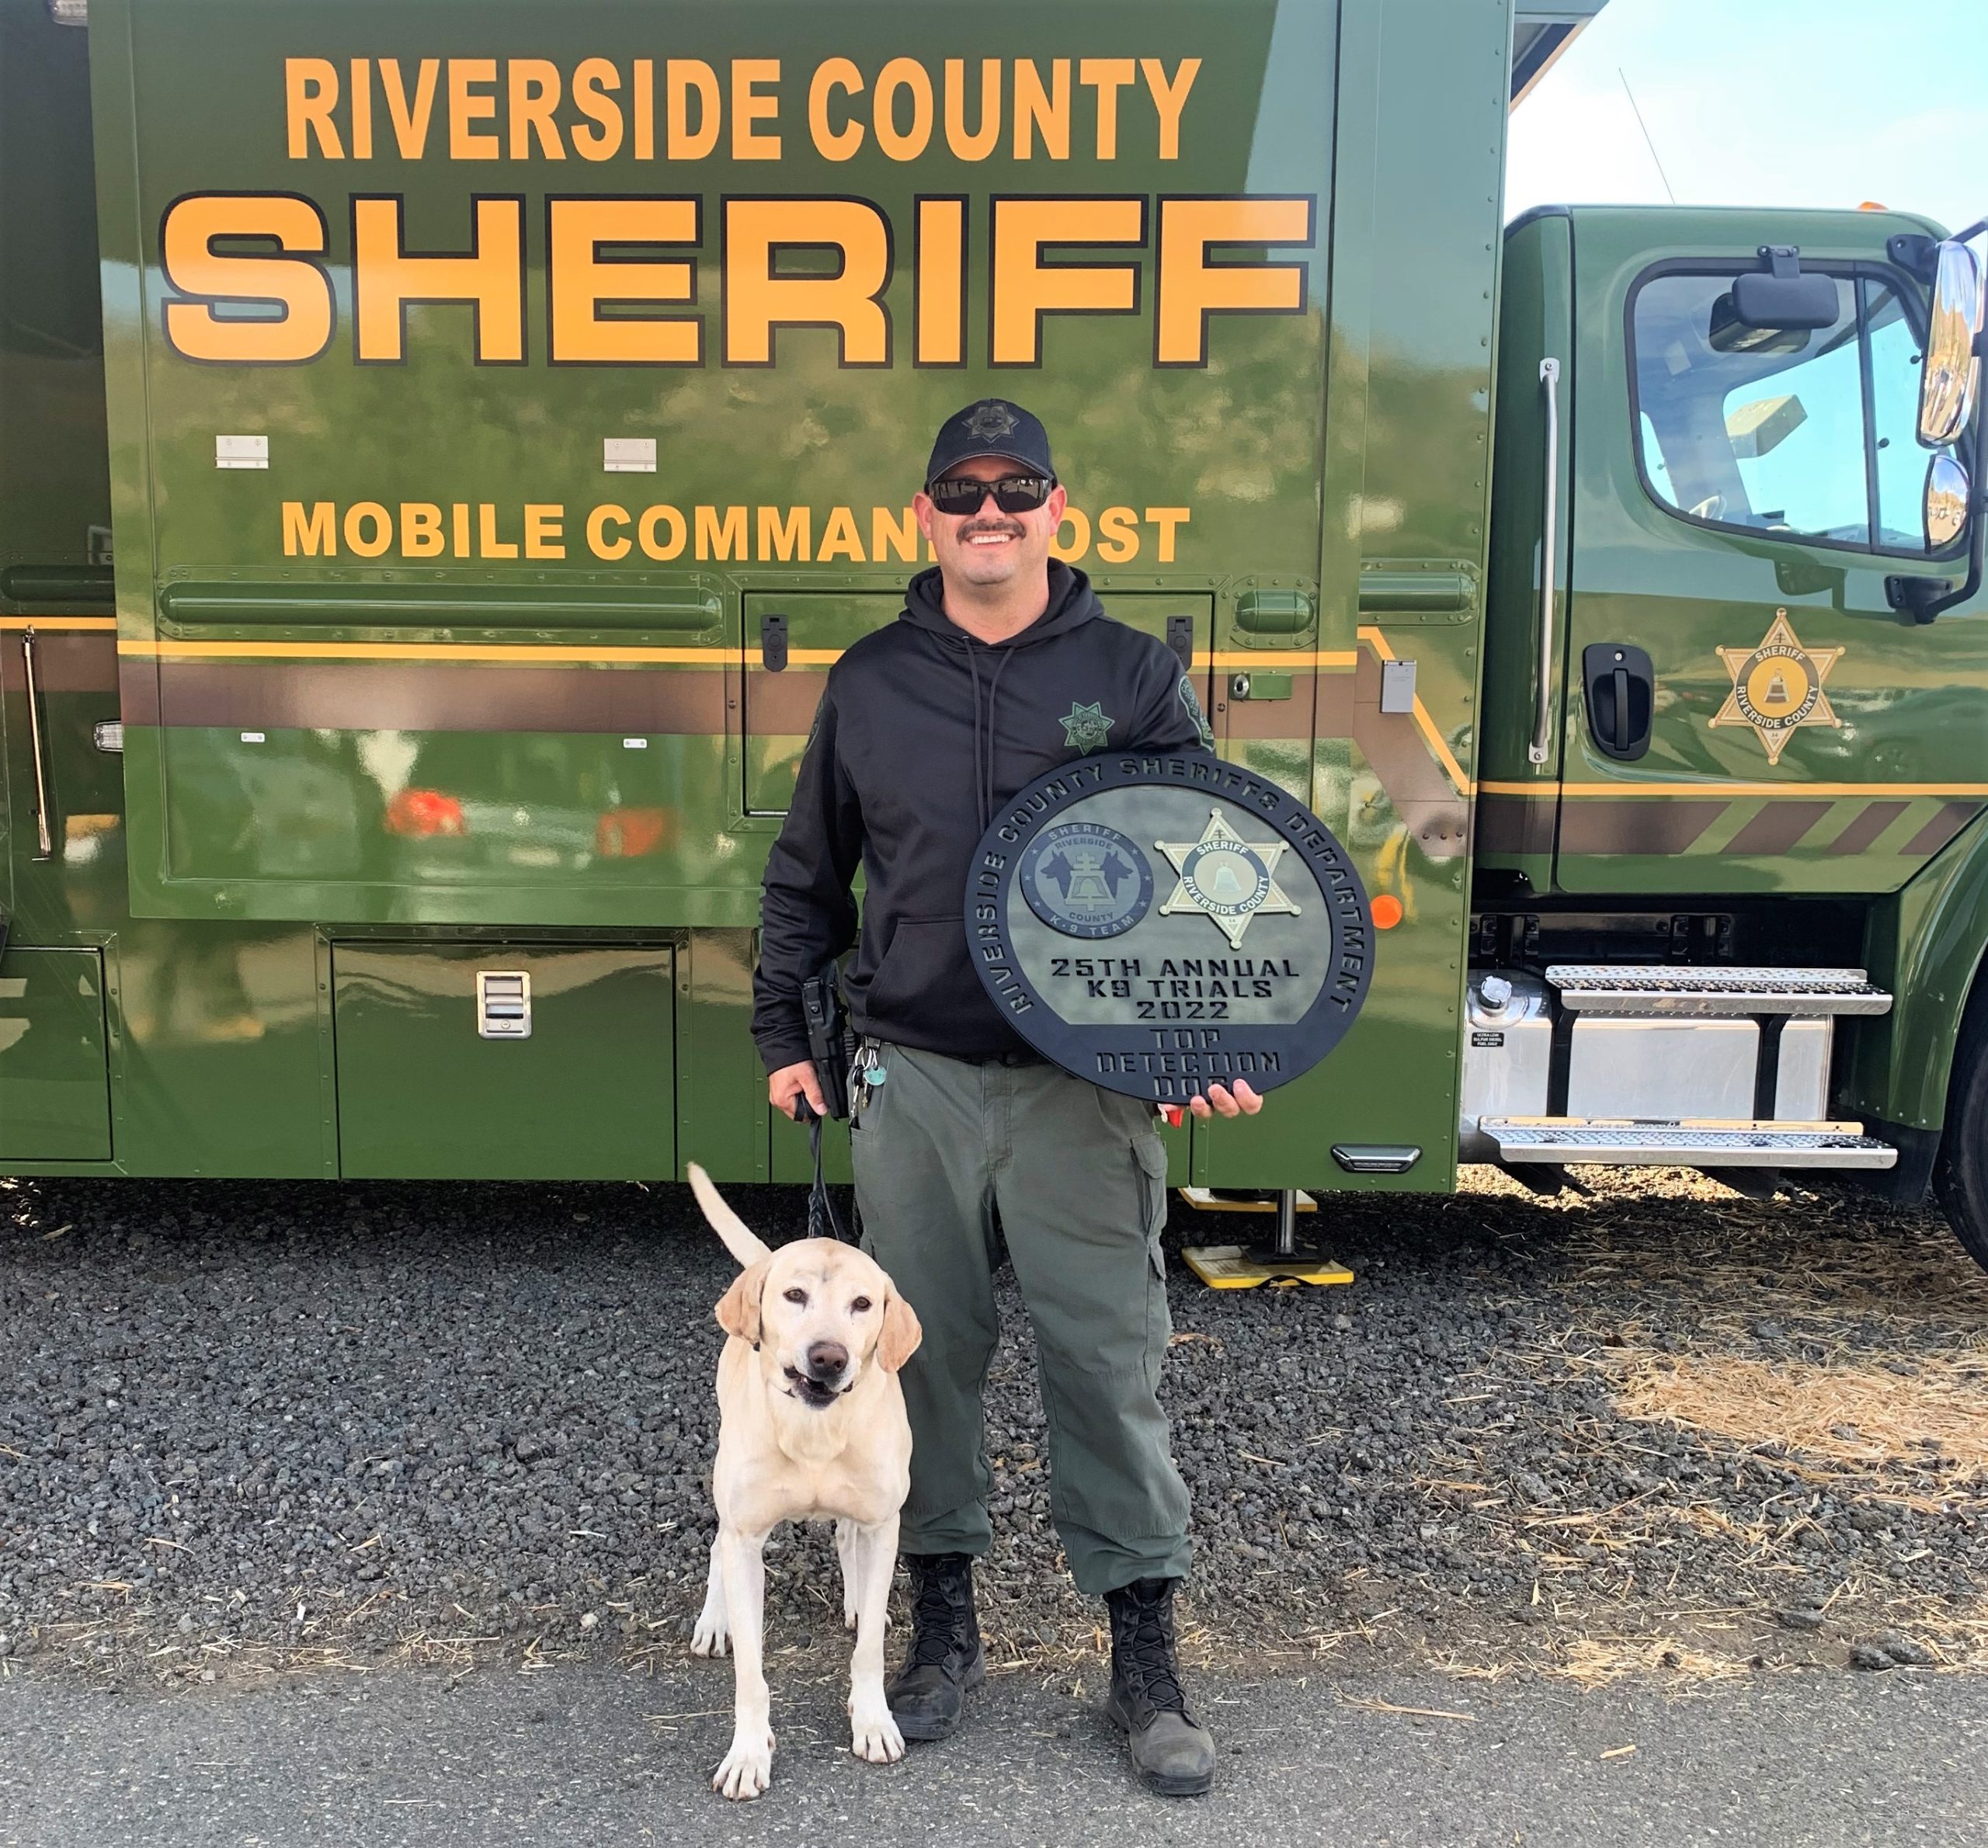 CDCR Officer and K-9 Camo hold award while standing in front of Riverside County Sheriff Mobile Command Unit.